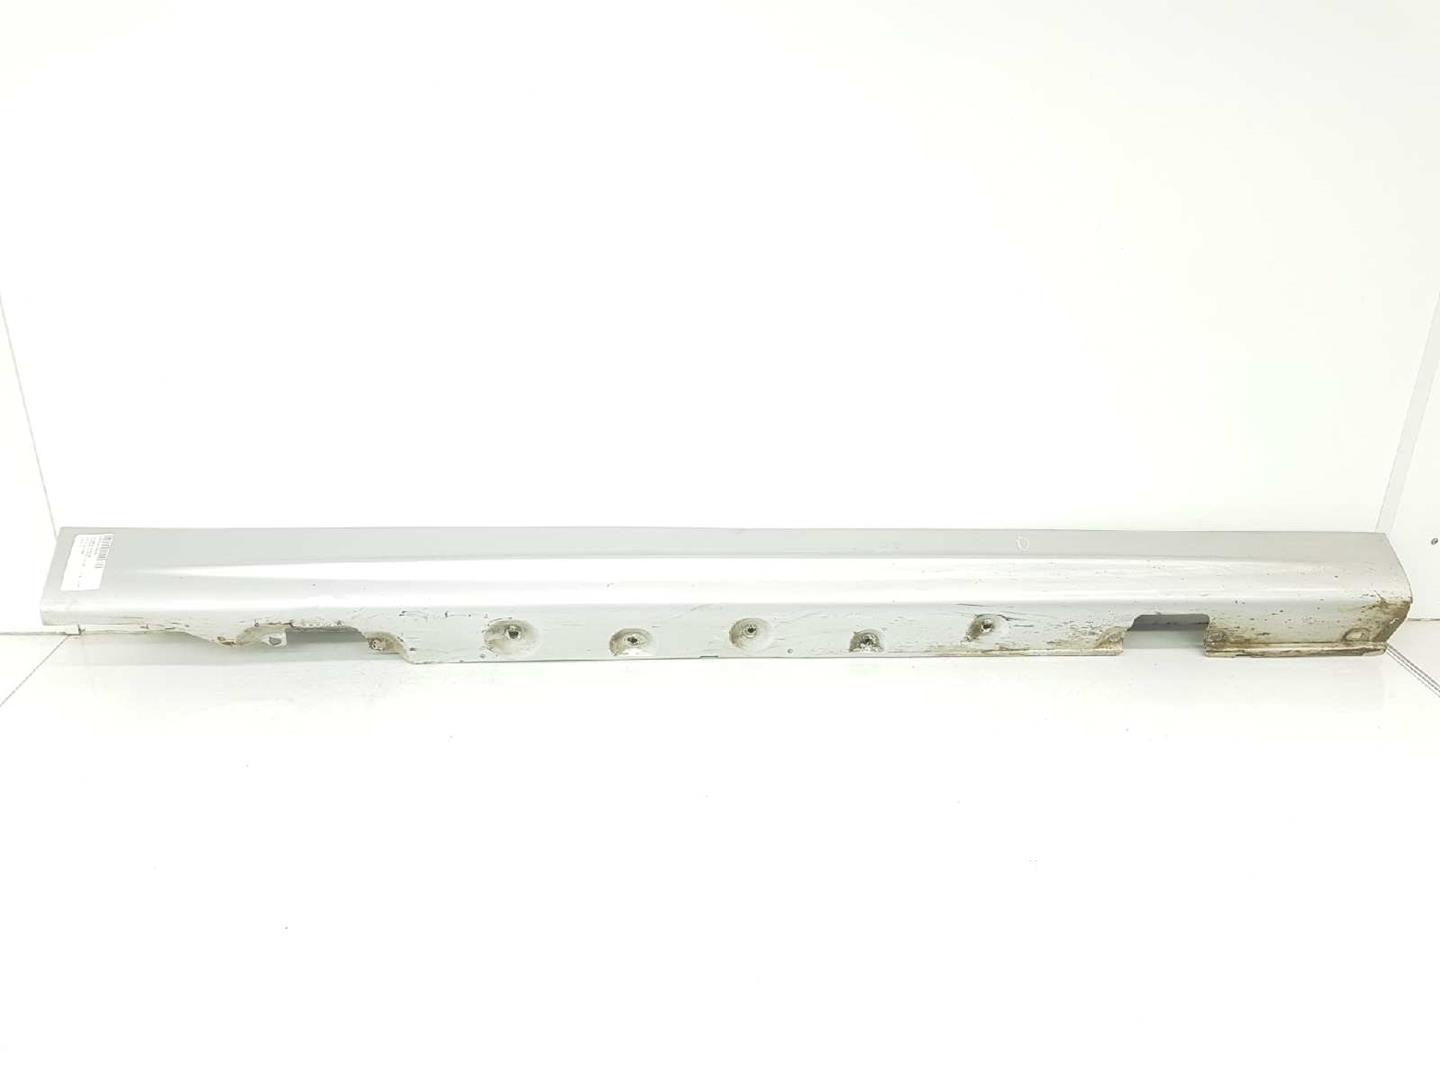 BMW 3 Series E46 (1997-2006) Right Side Sideskirt 51718211944, 51718211944, GRIS354 19733998